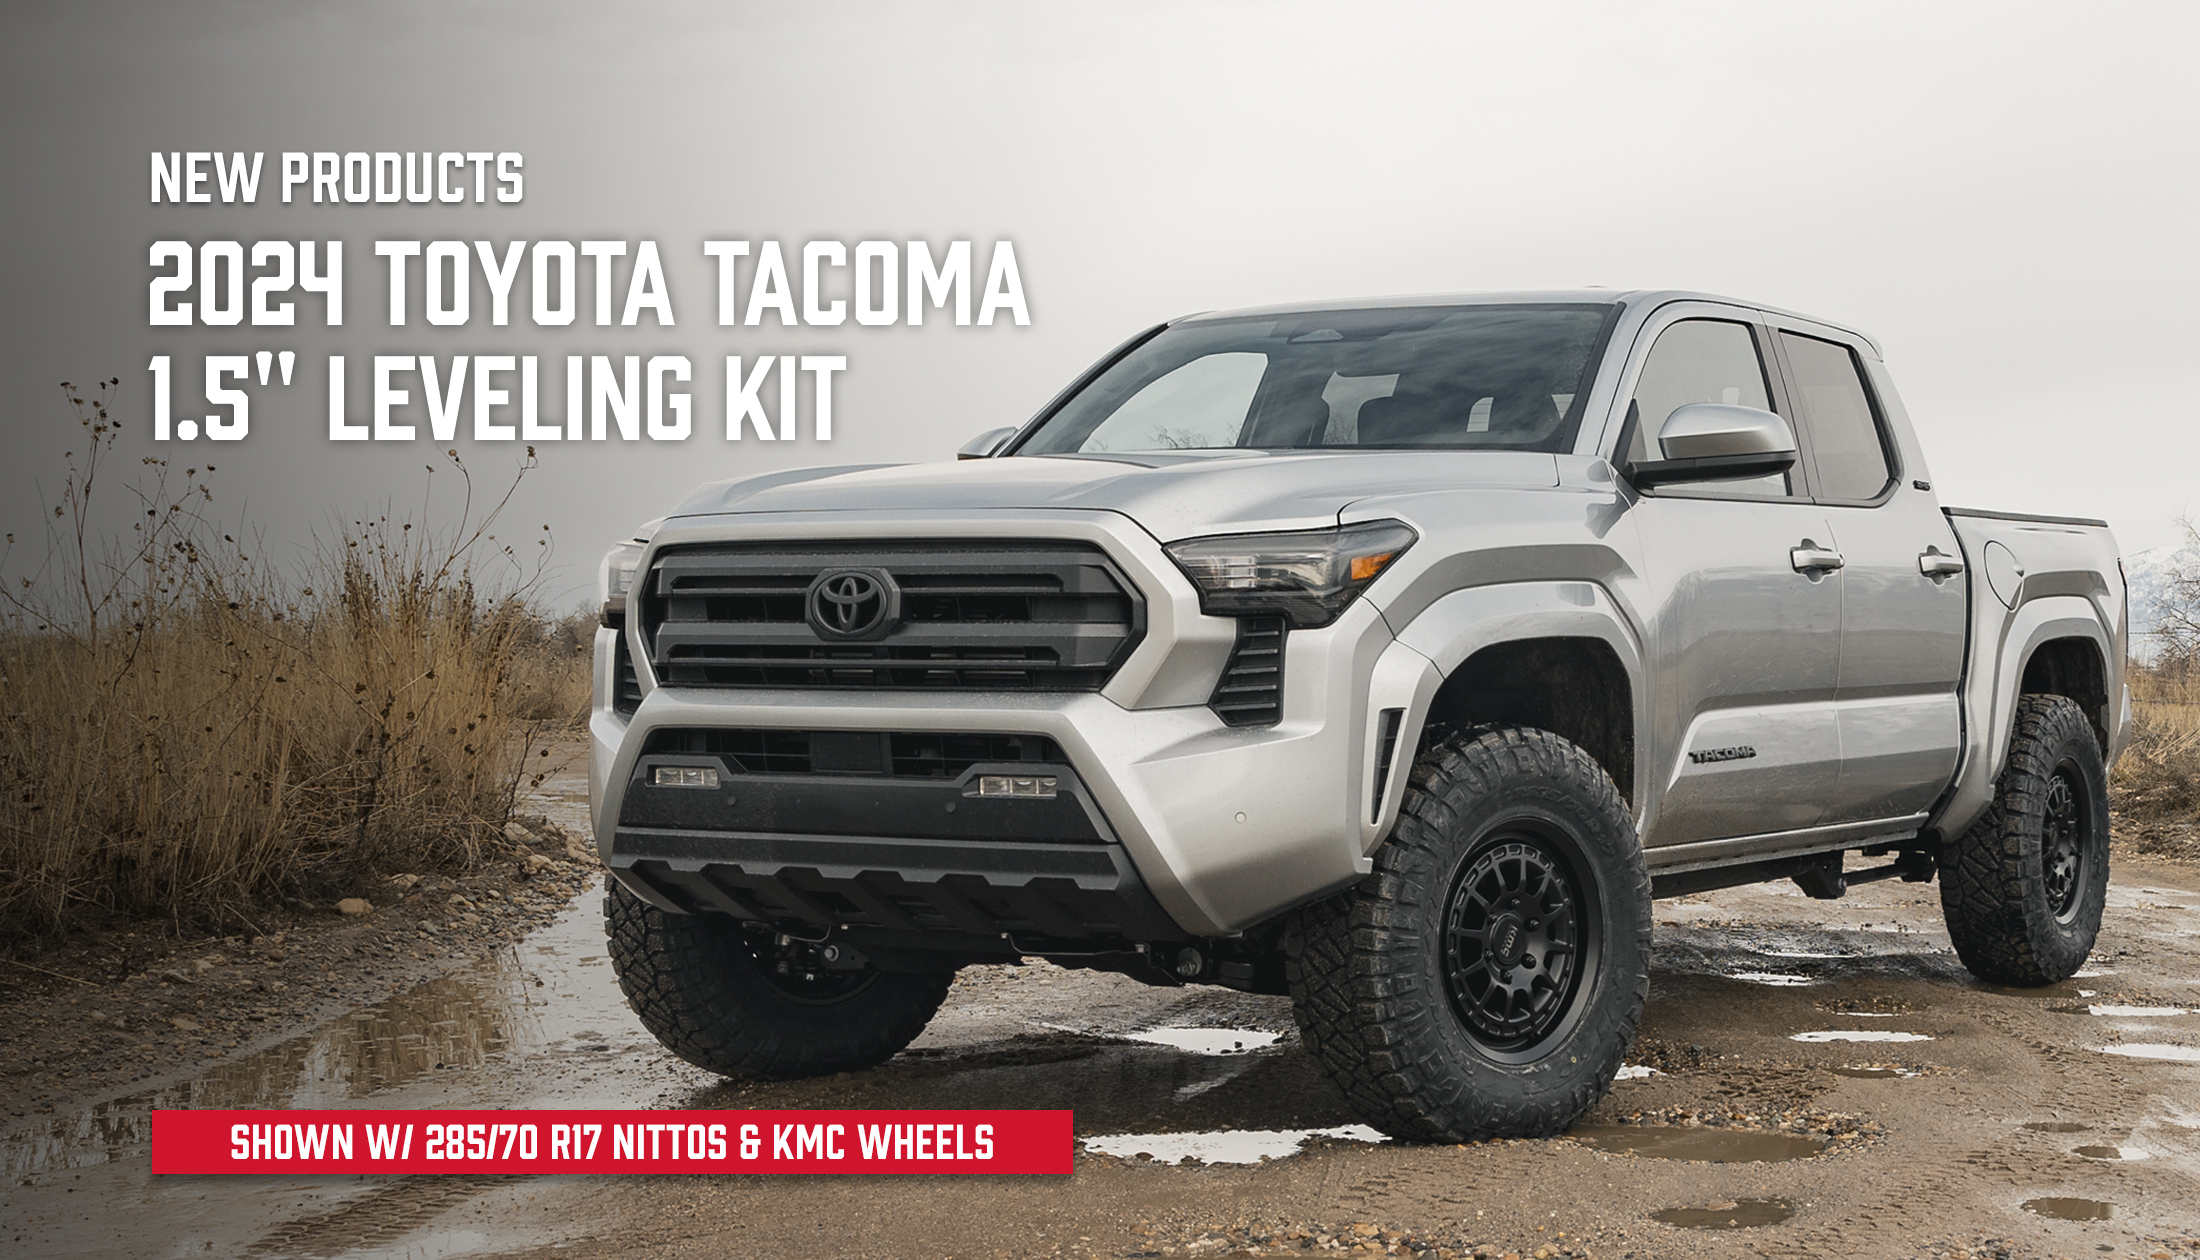 ReadyLIFT Introduces an All-New 1.5" Leveling Kit for the New 2024 Toyota Tacoma